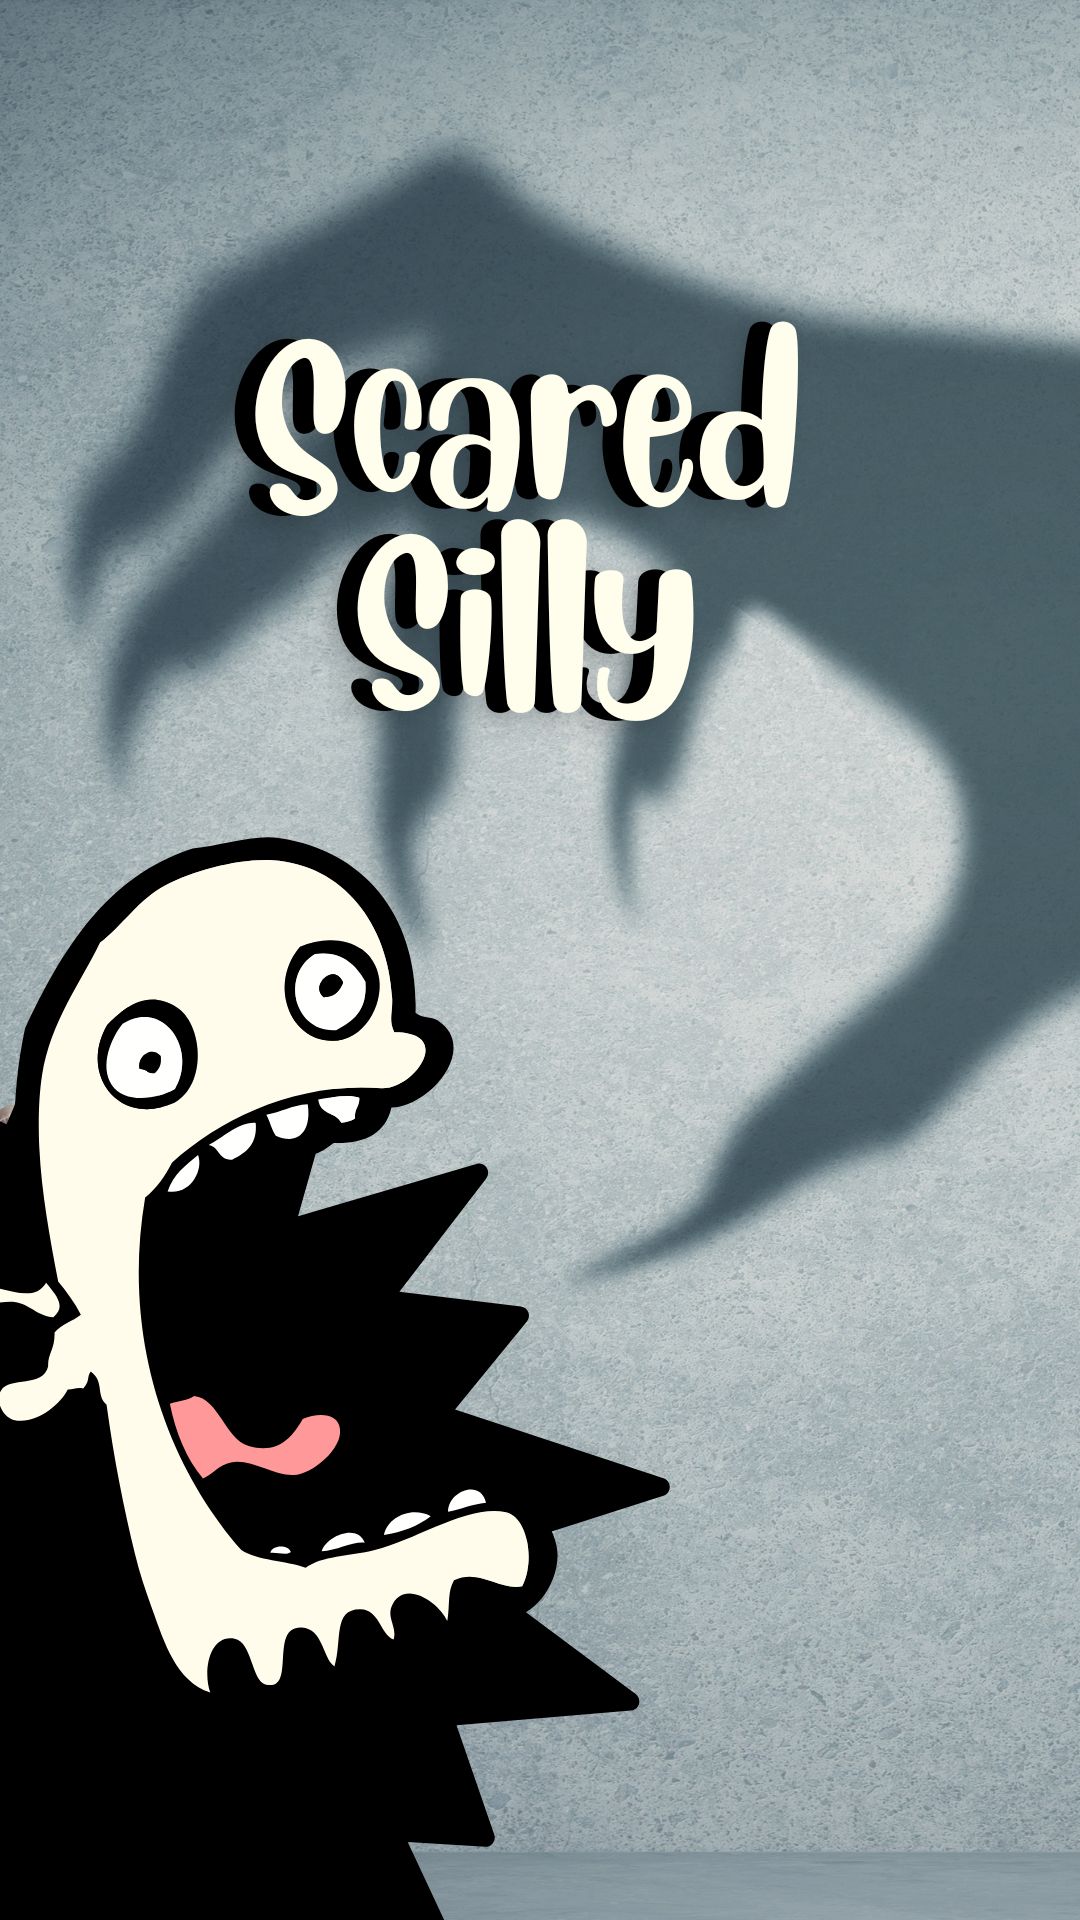 Scary shadow hand reaching for a terrified cartoon ghost who is screaming